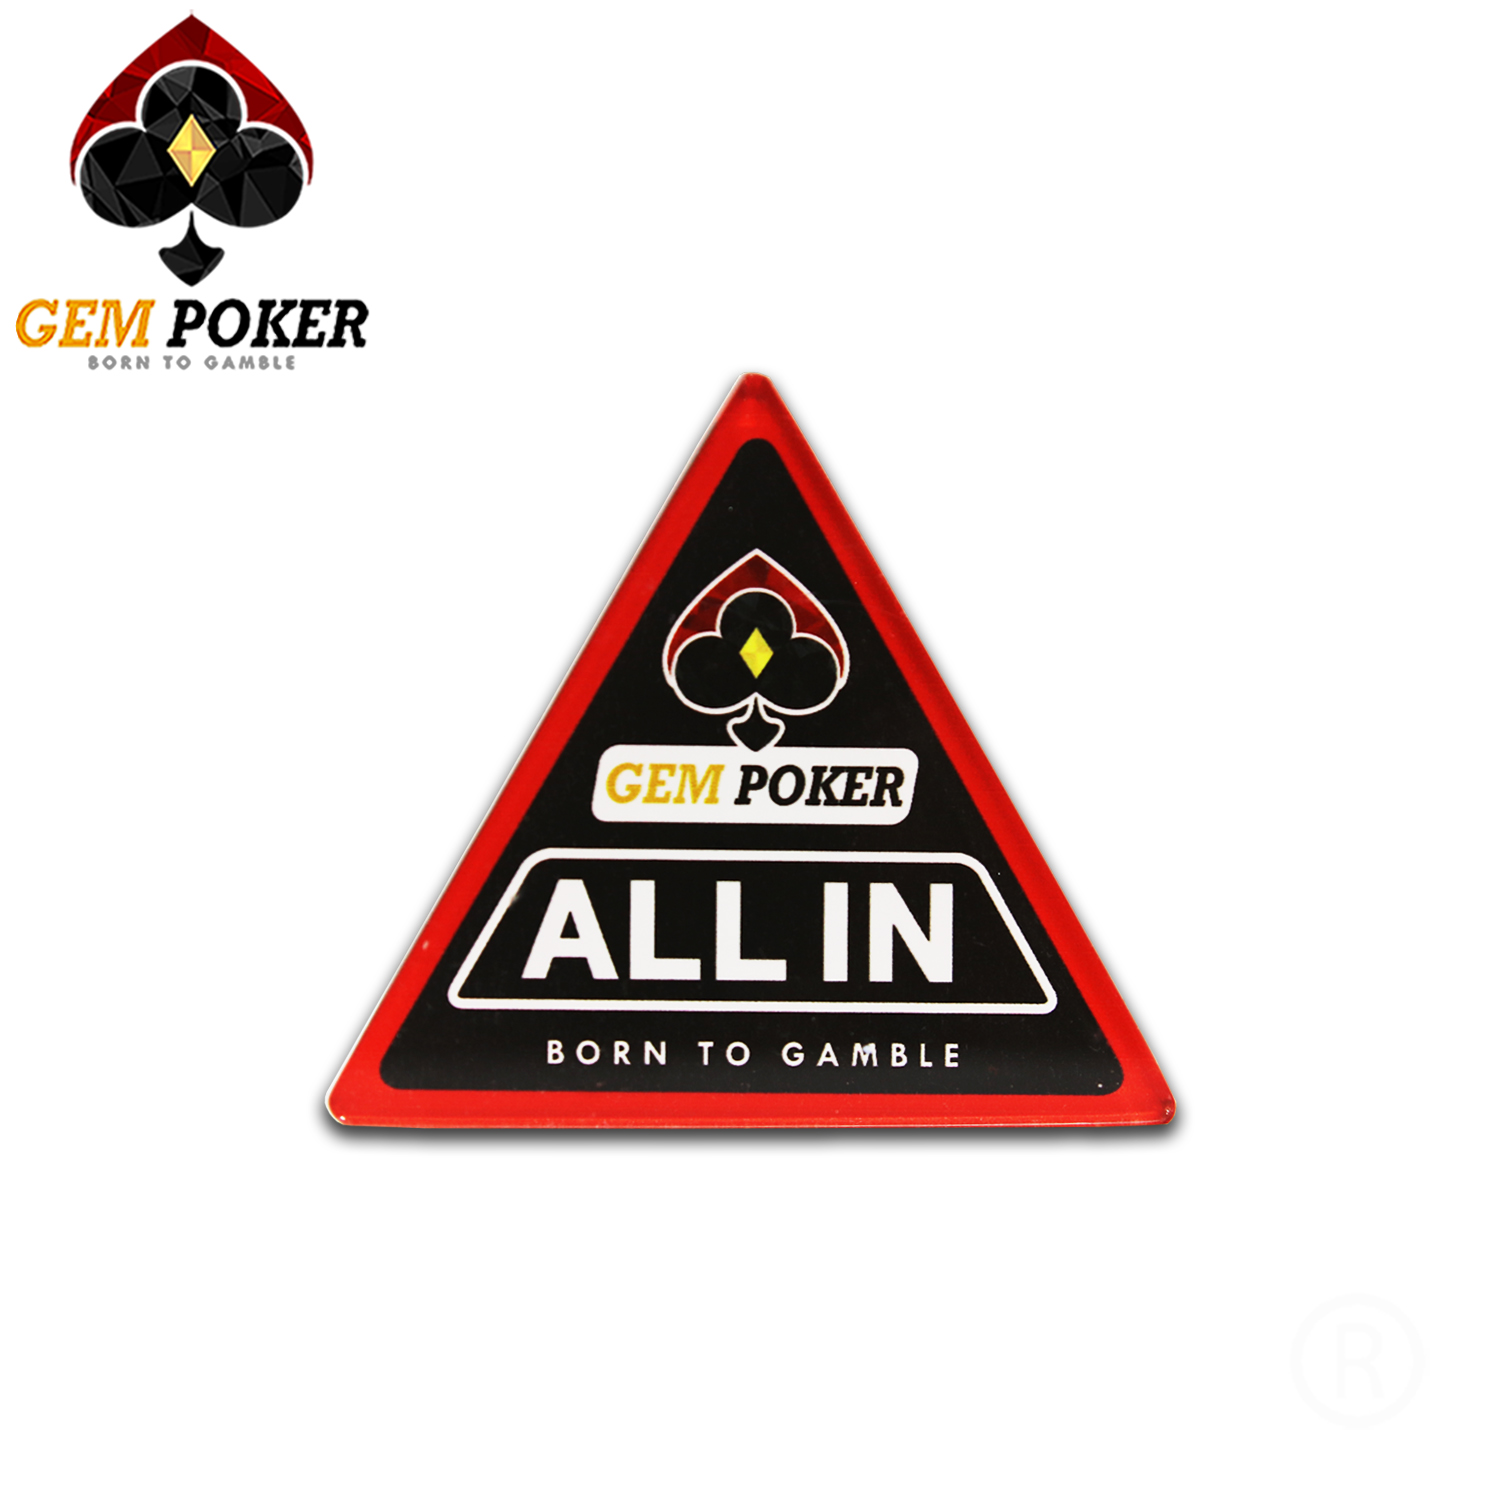 ALL-IN BUTTON GEMPOKER - 01